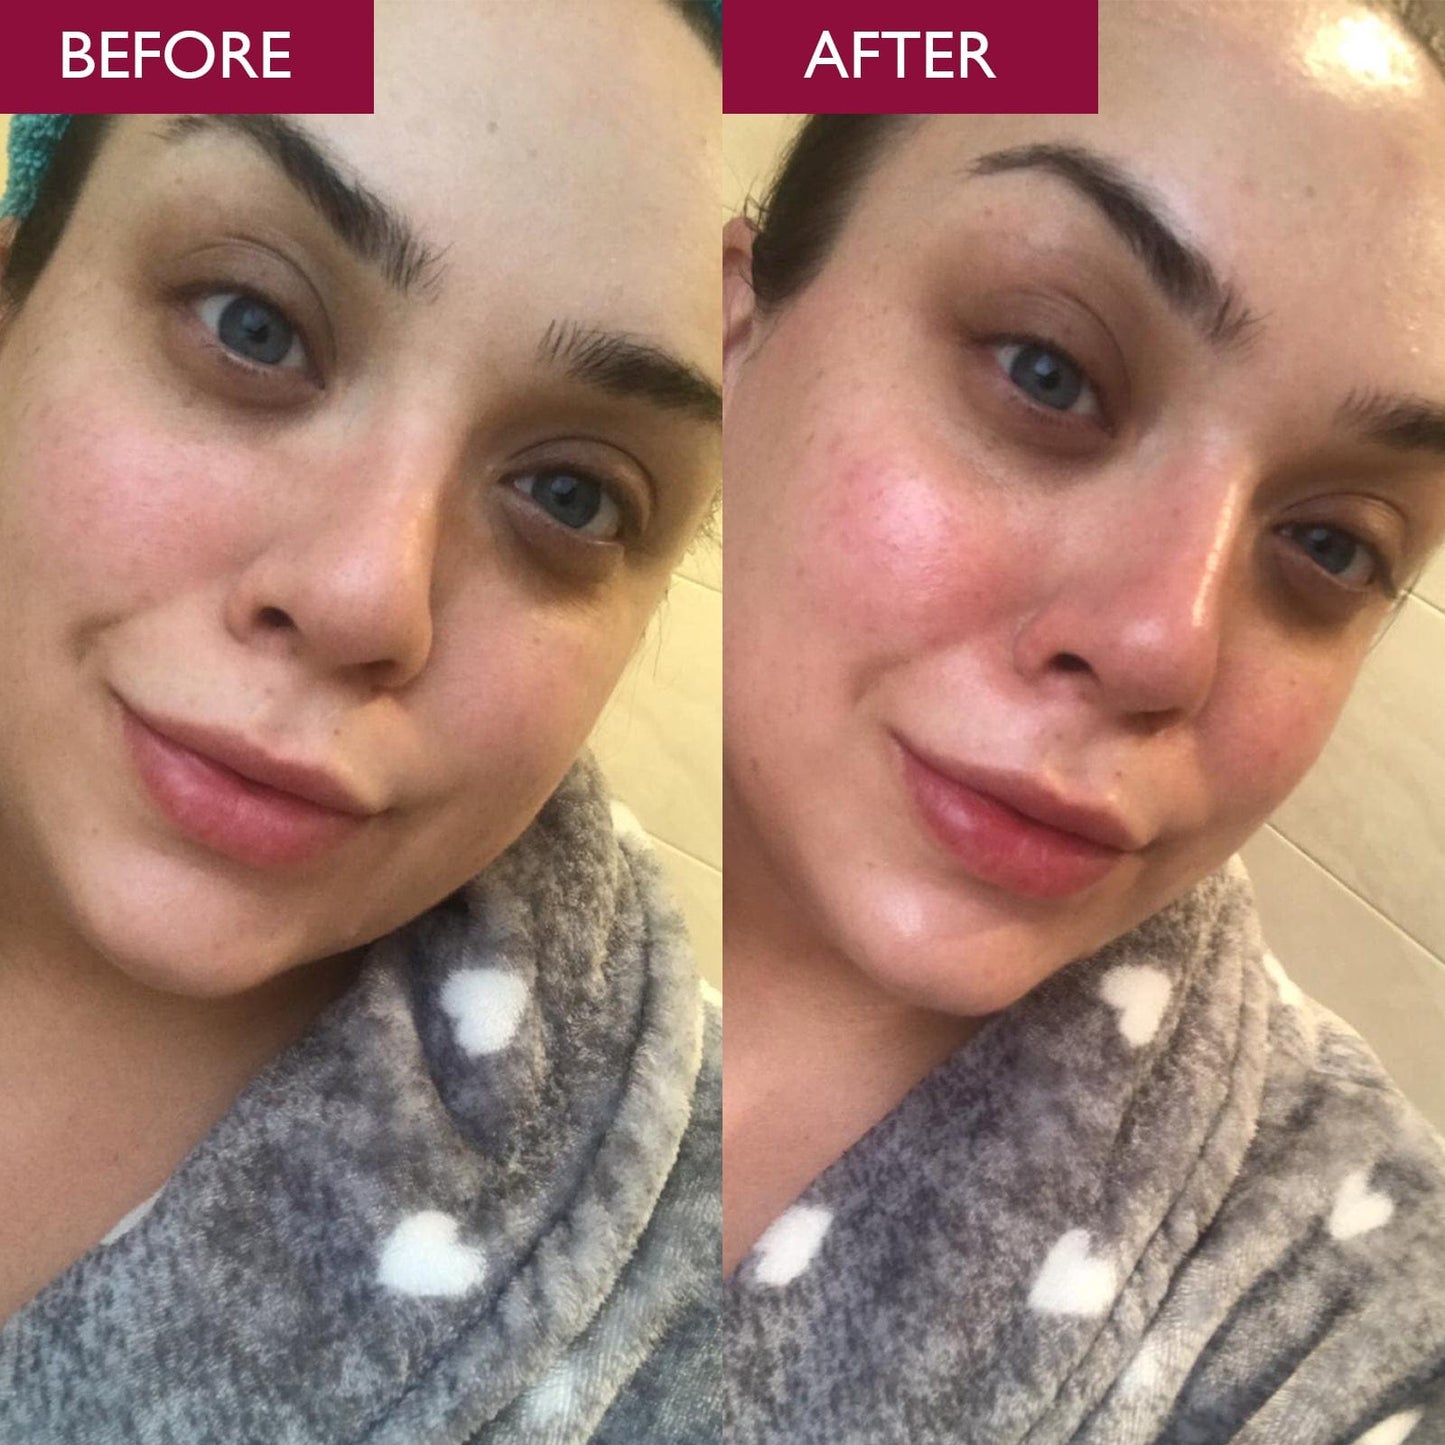 Before and after image of a woman showing the benefits of using an enzyme cleanser as part of a 5 step anti ageing skincare routine.